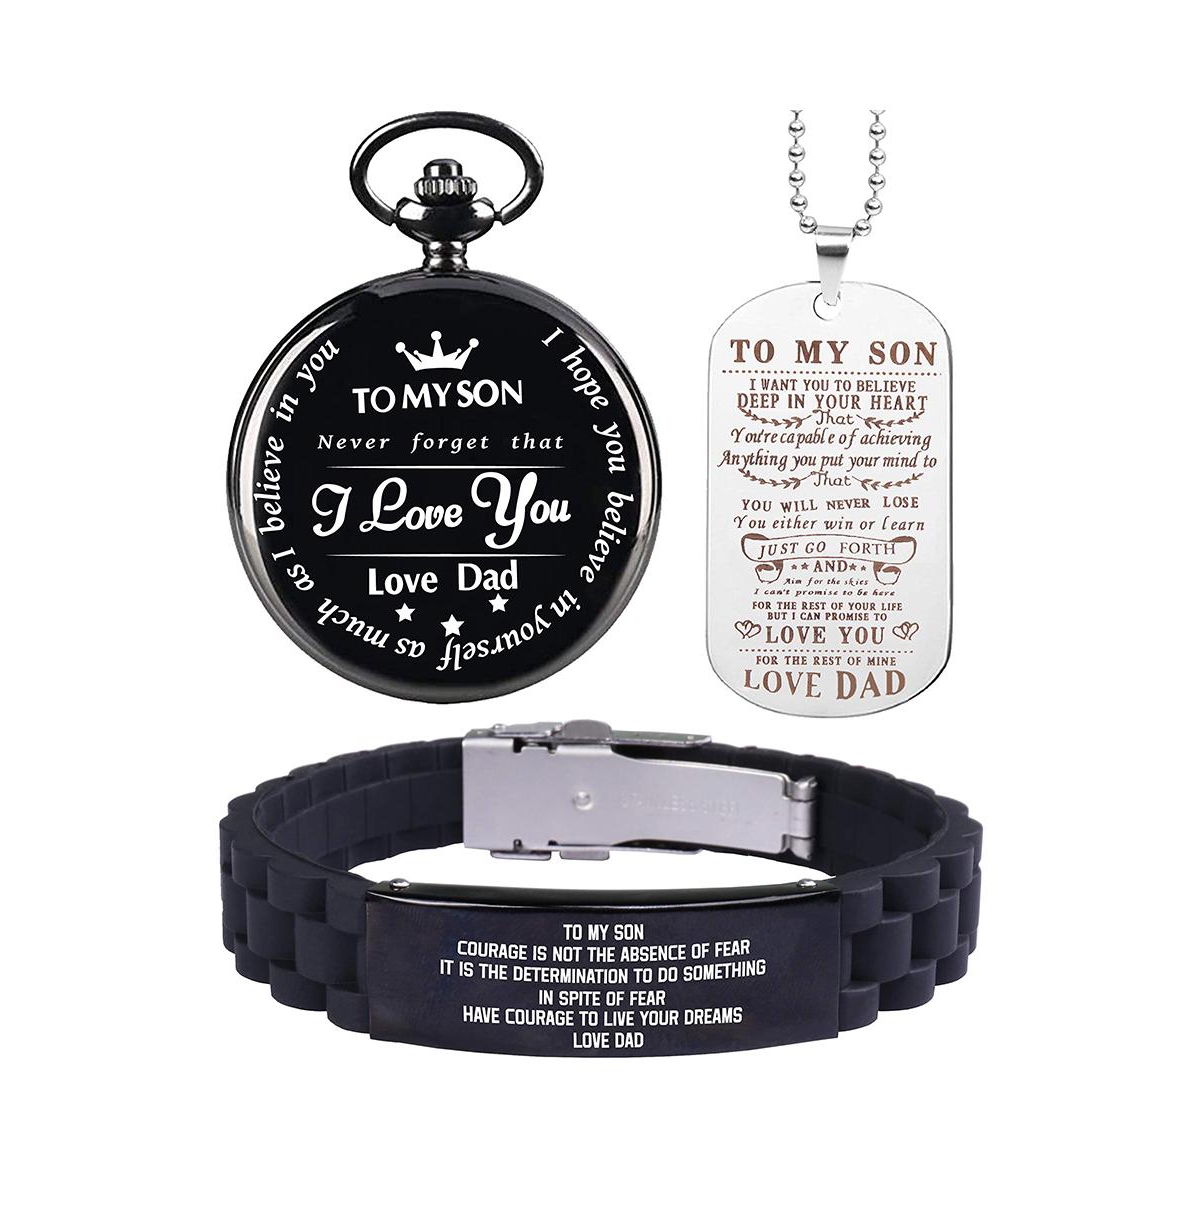 To My Son Pocket Watch, Bracelet, and Necklace Set - Gifts from Dad for Christmas, Graduation, and Birthday - Thoughtful Keepsake for Sons - Black